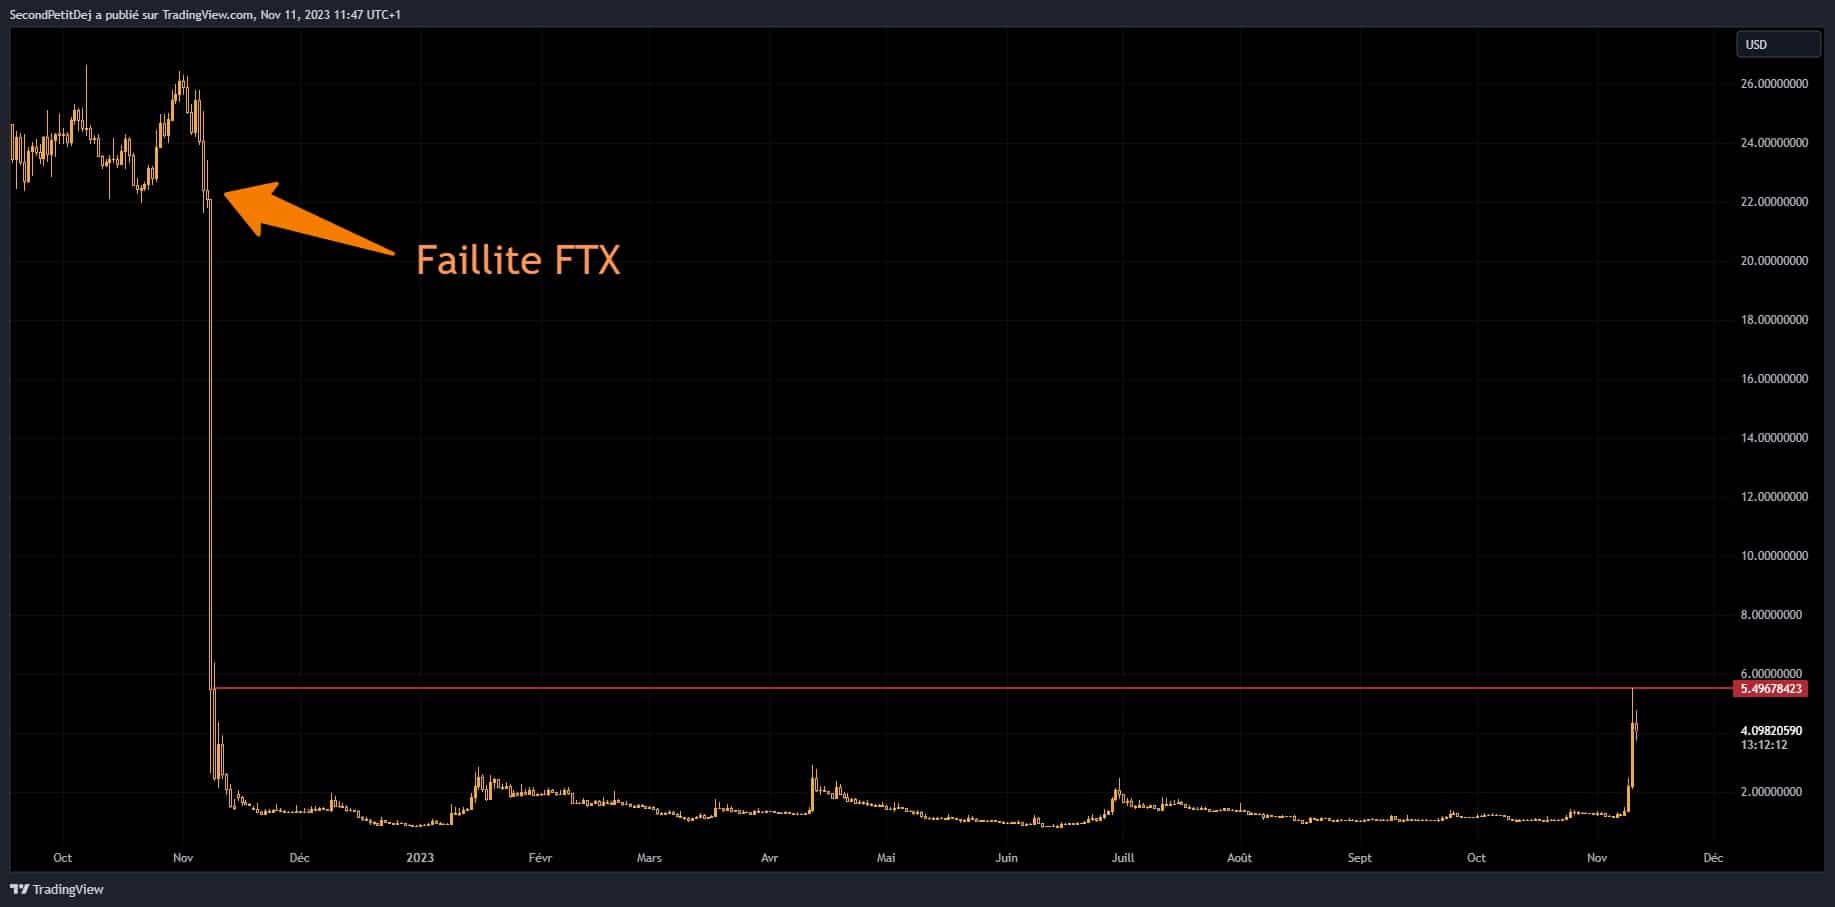 Evolution of the FTT token price from the FTX bankruptcy to today